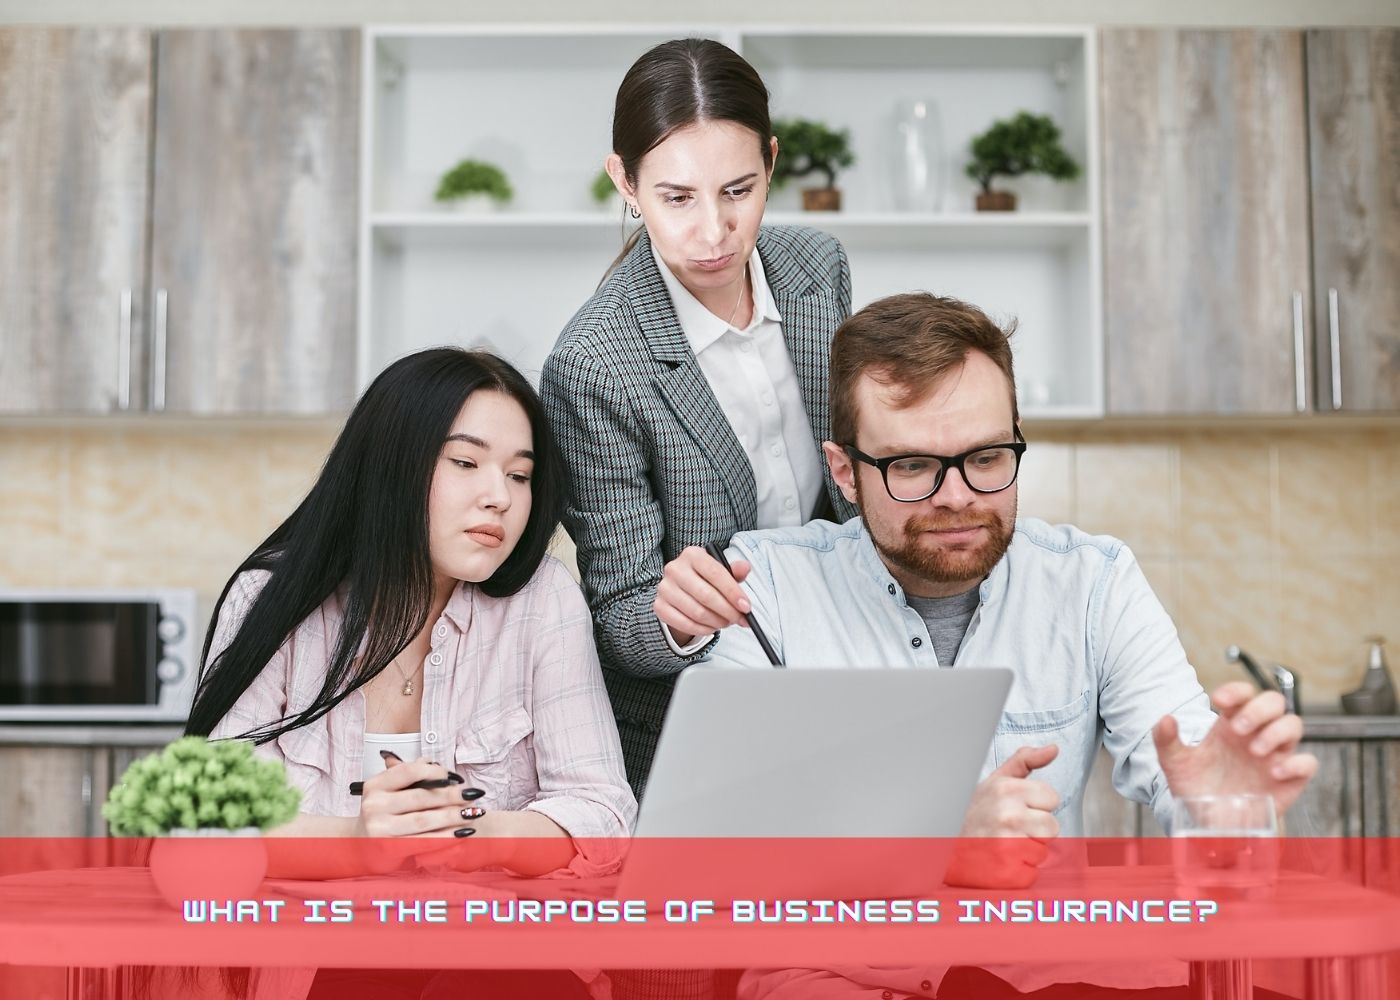 What is the purpose of Business Insurance?